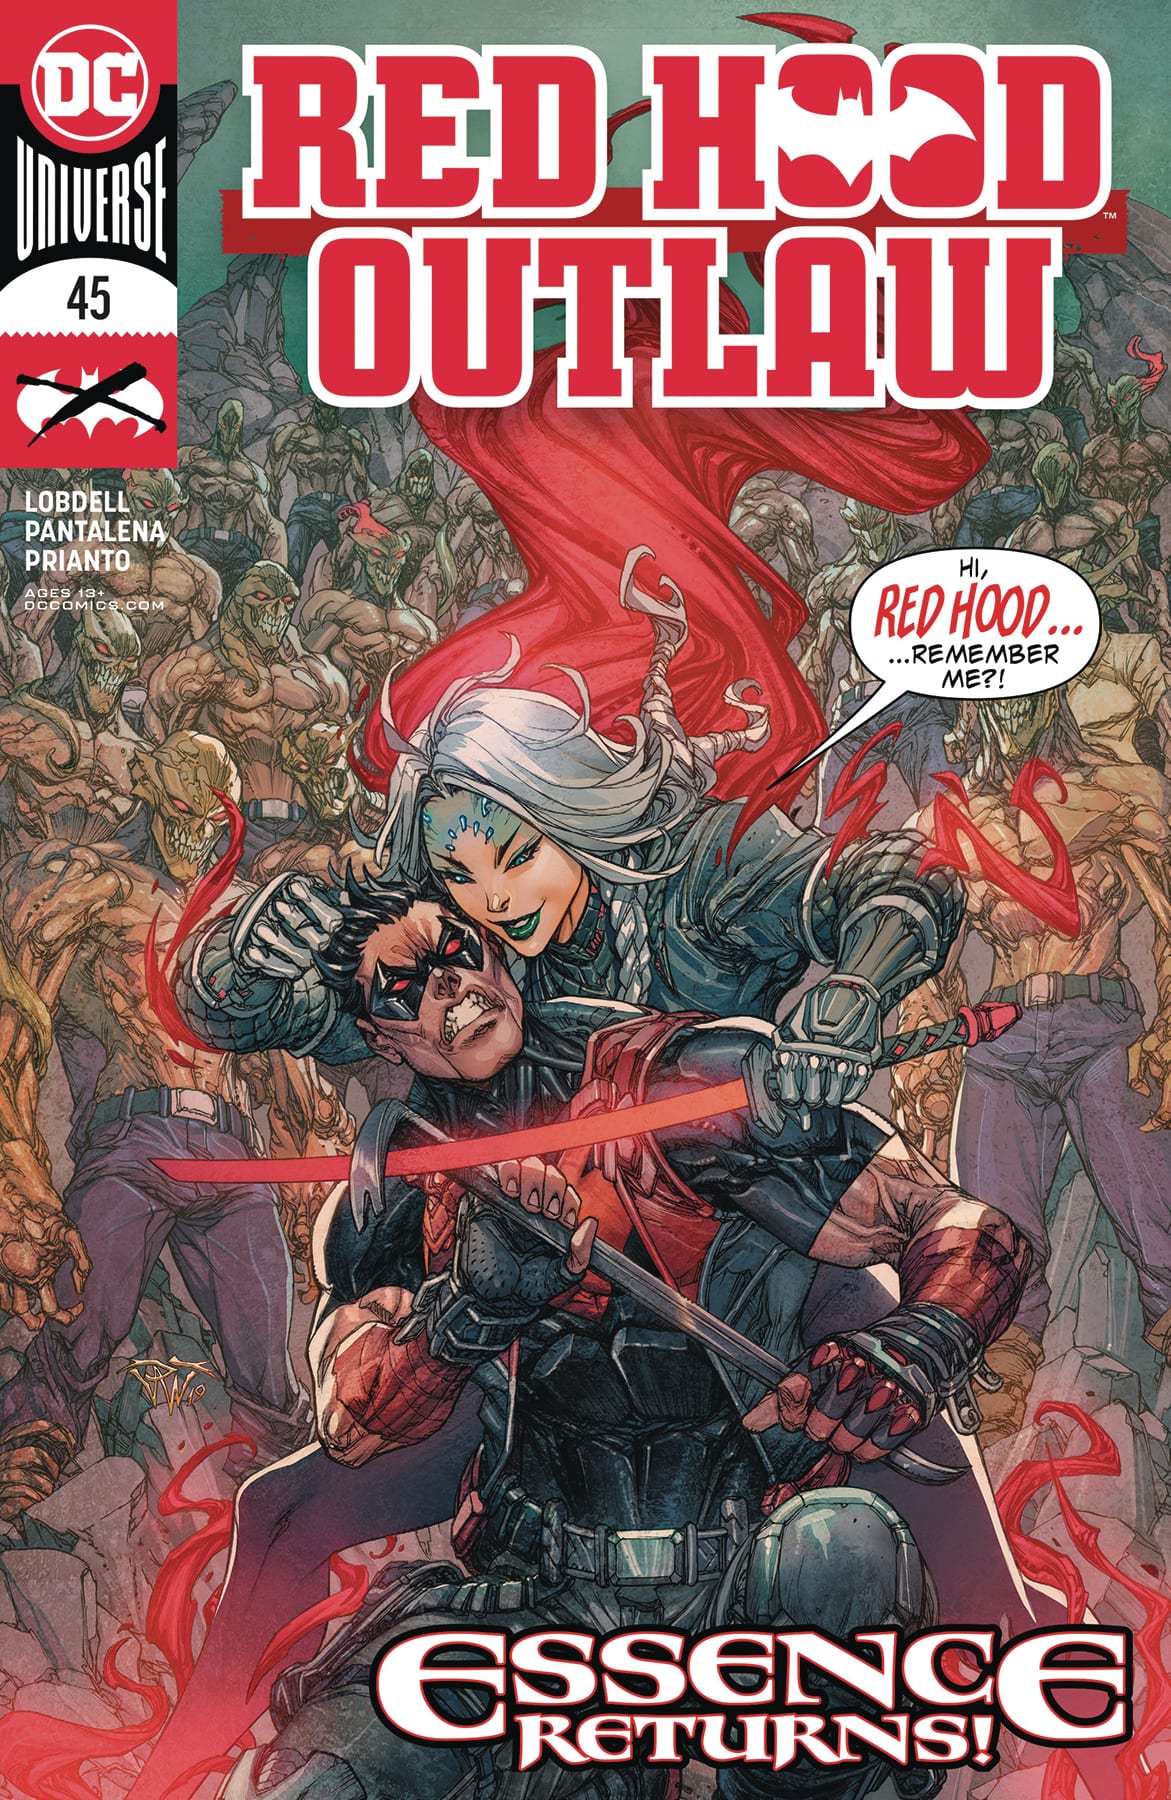 RED HOOD OUTLAW 45